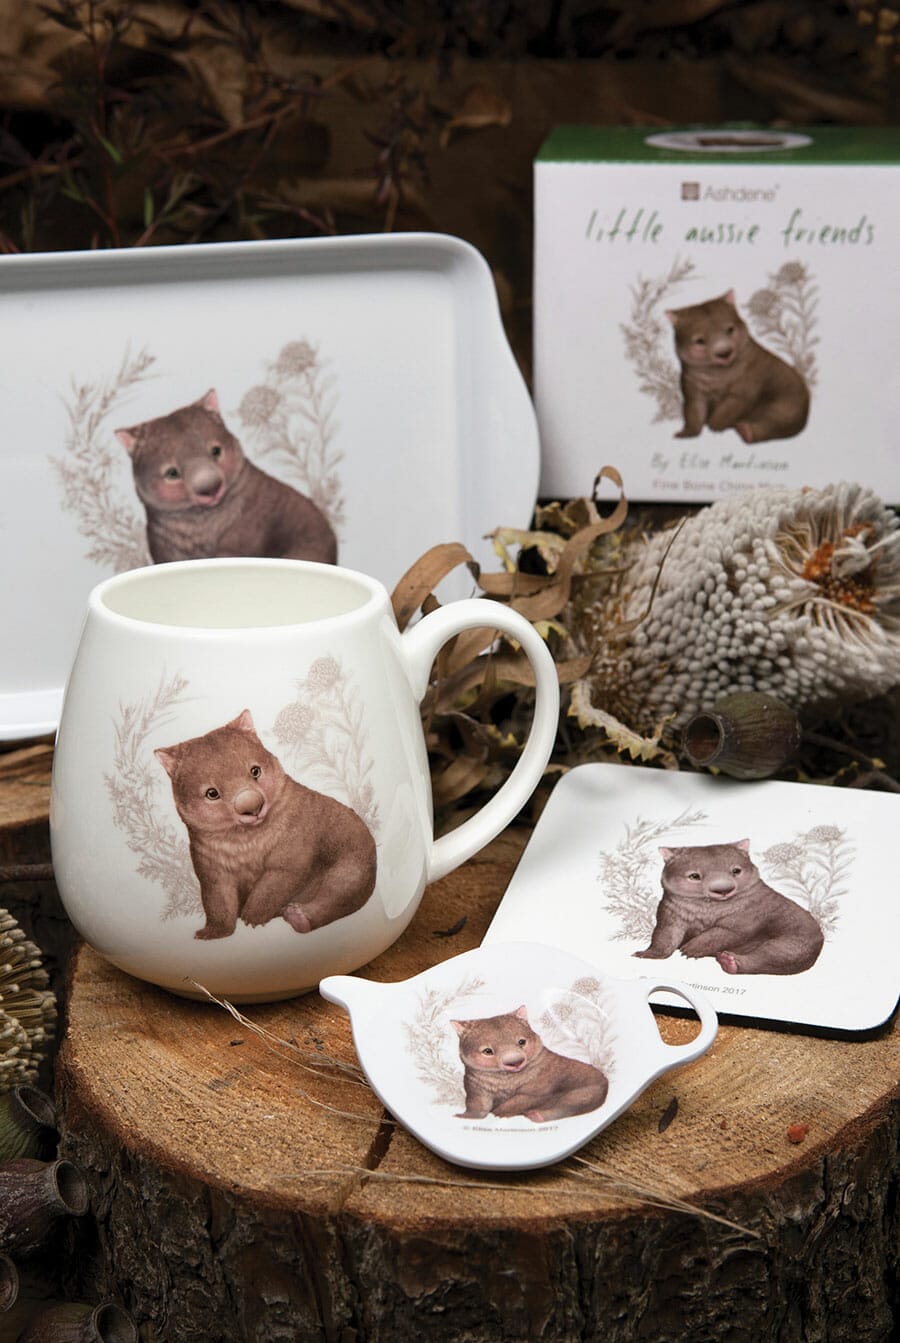 Picture of Little Aussie Friends article showing baby Australian animal tableware wombat product group shot